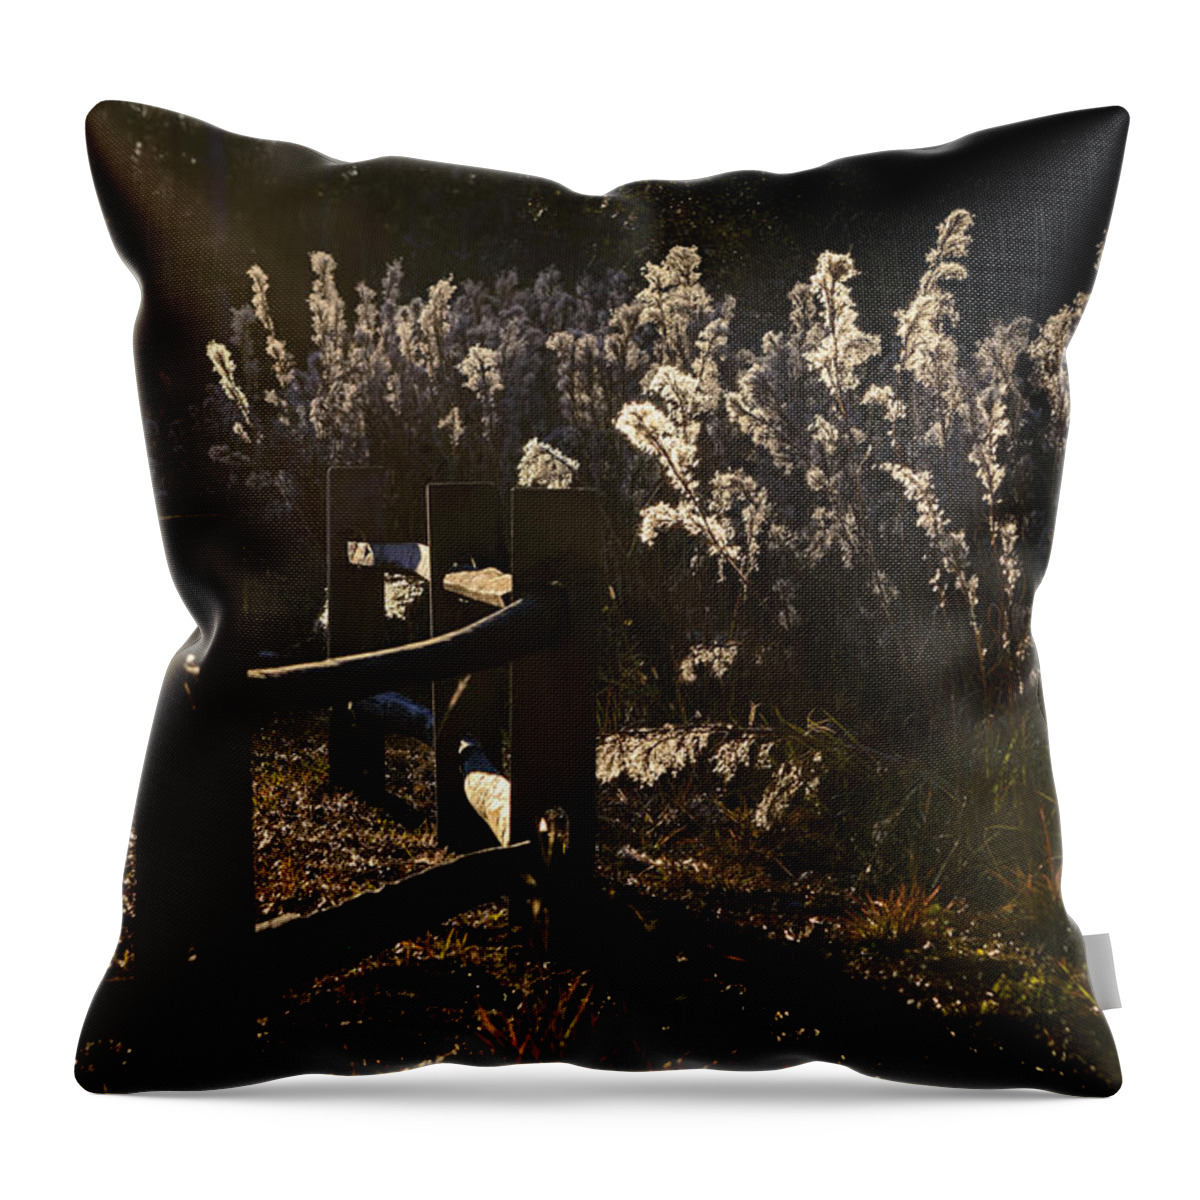 Wildflowers Throw Pillow featuring the photograph By The Way by Steven Sparks